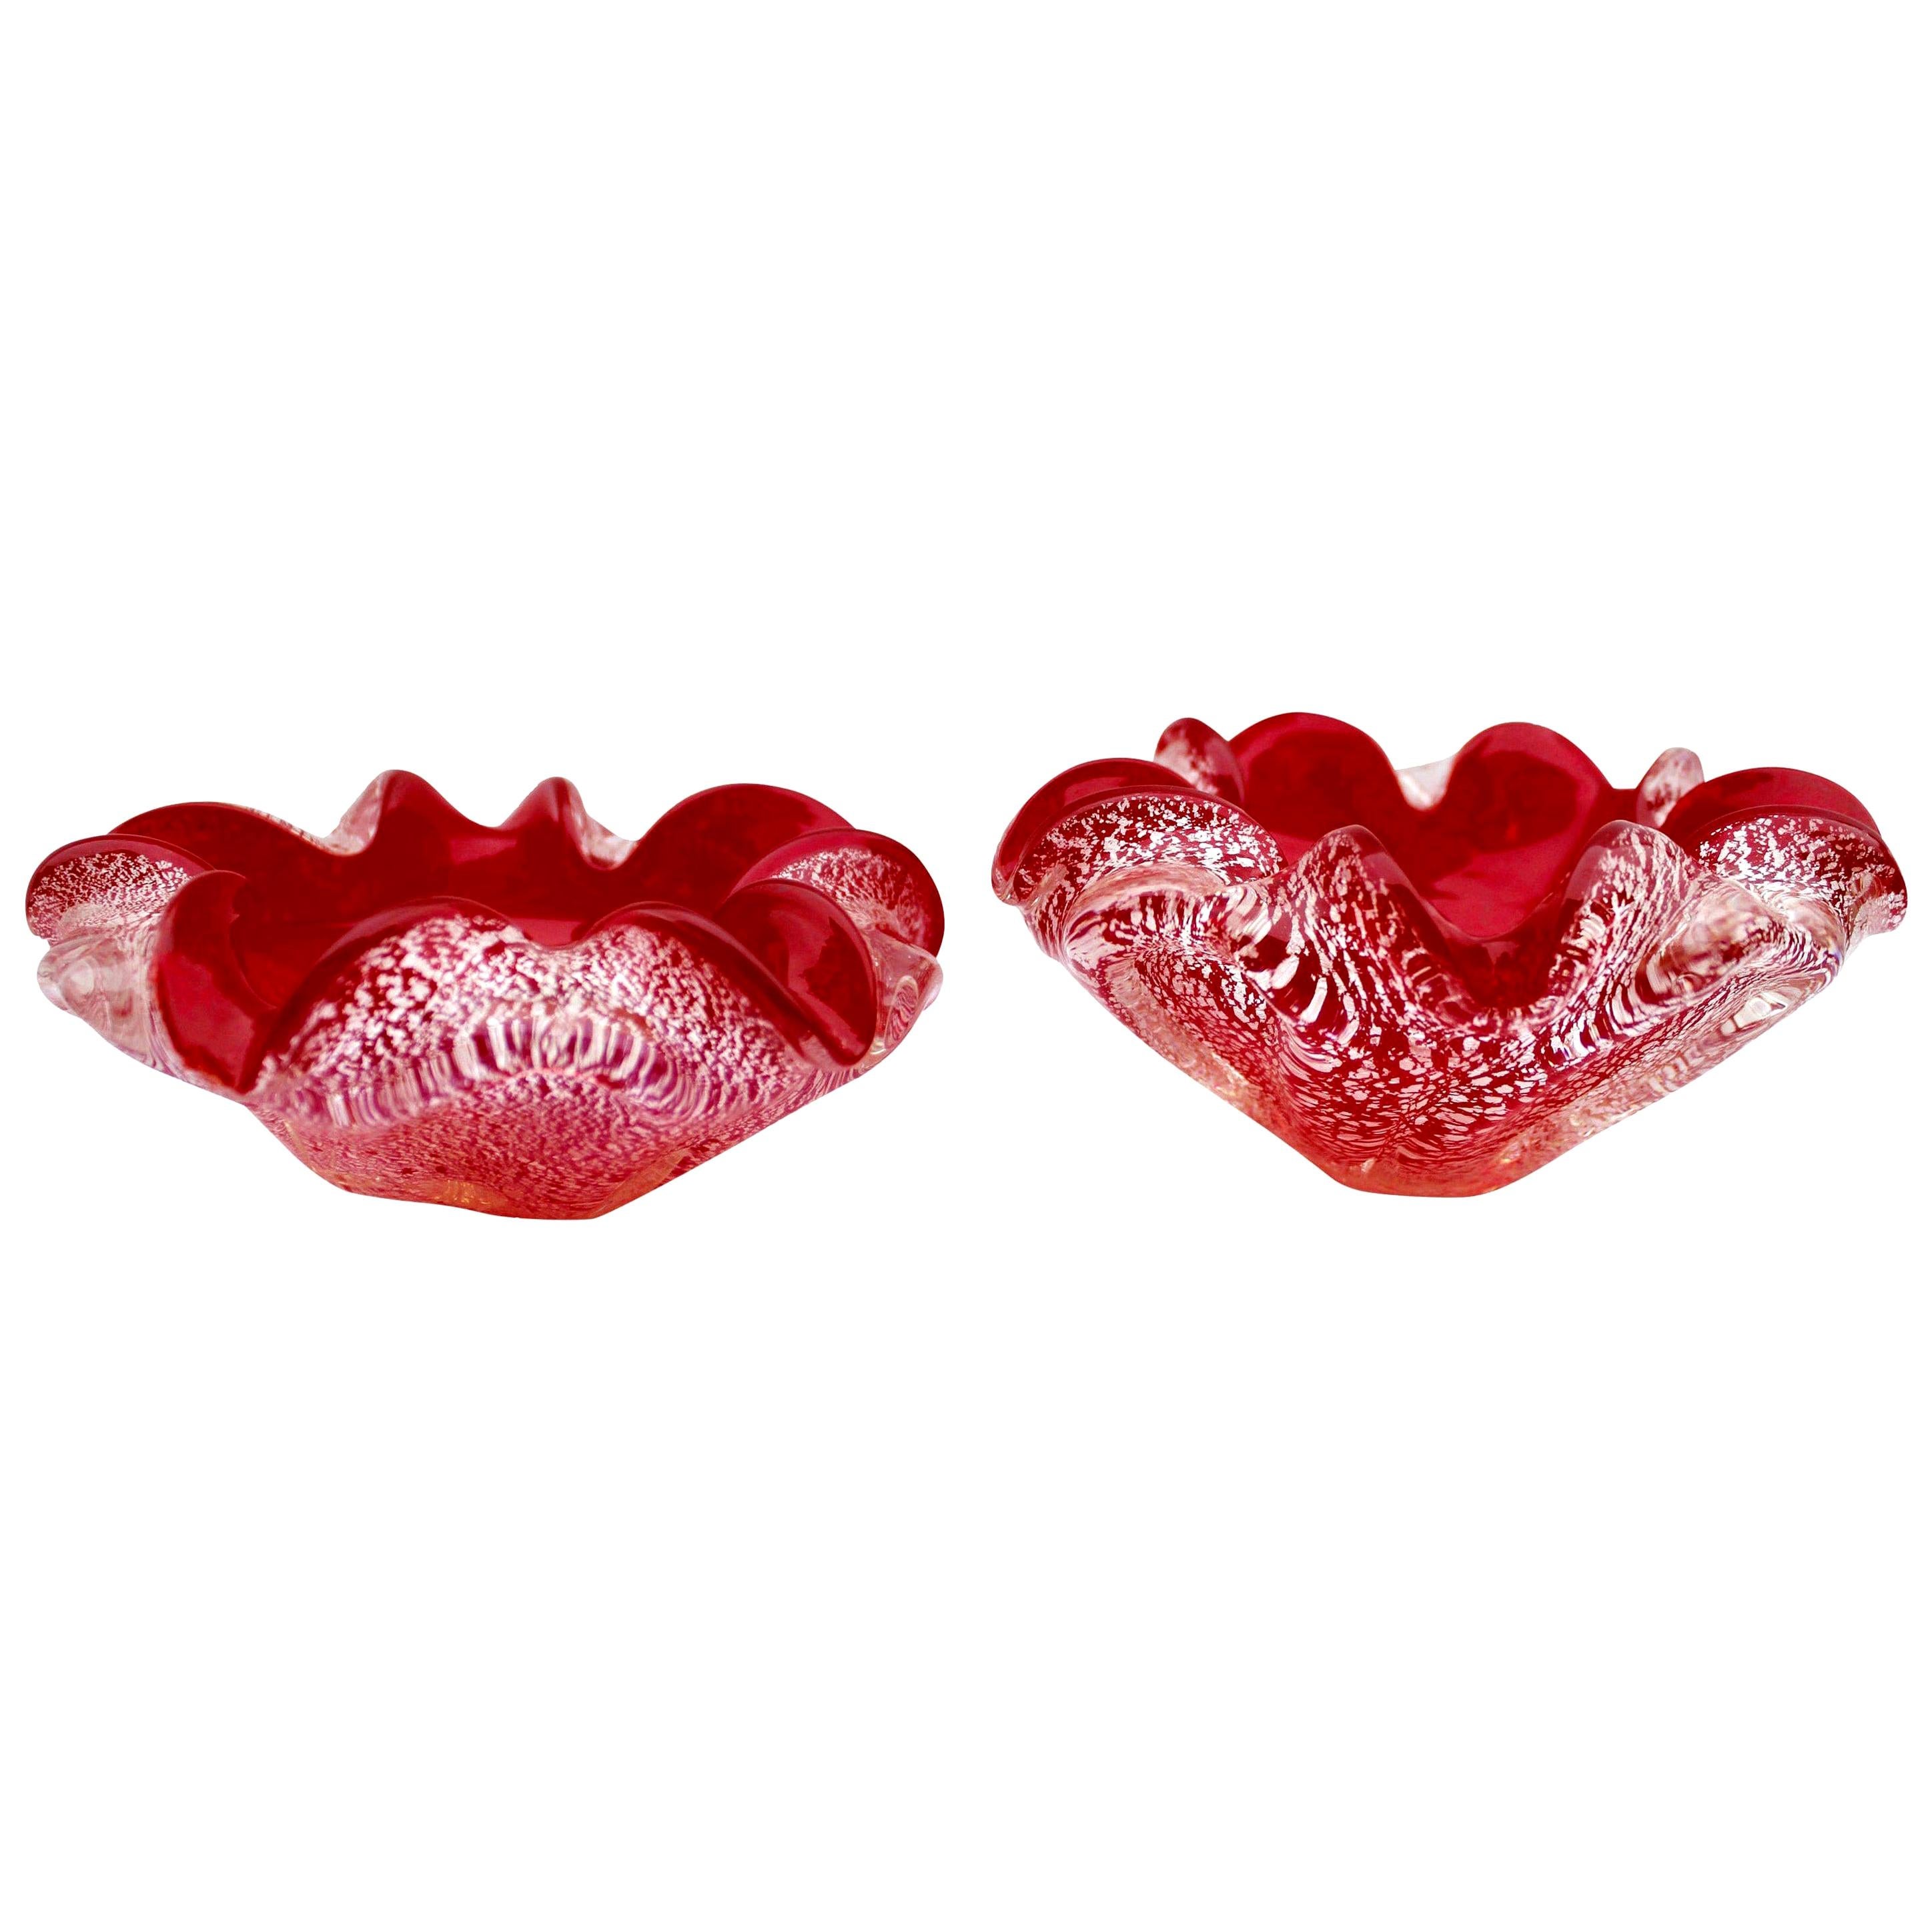 Pair of Very Intense Red Murano Sommerso Silver Flecks Ruffled Edge Bowls For Sale